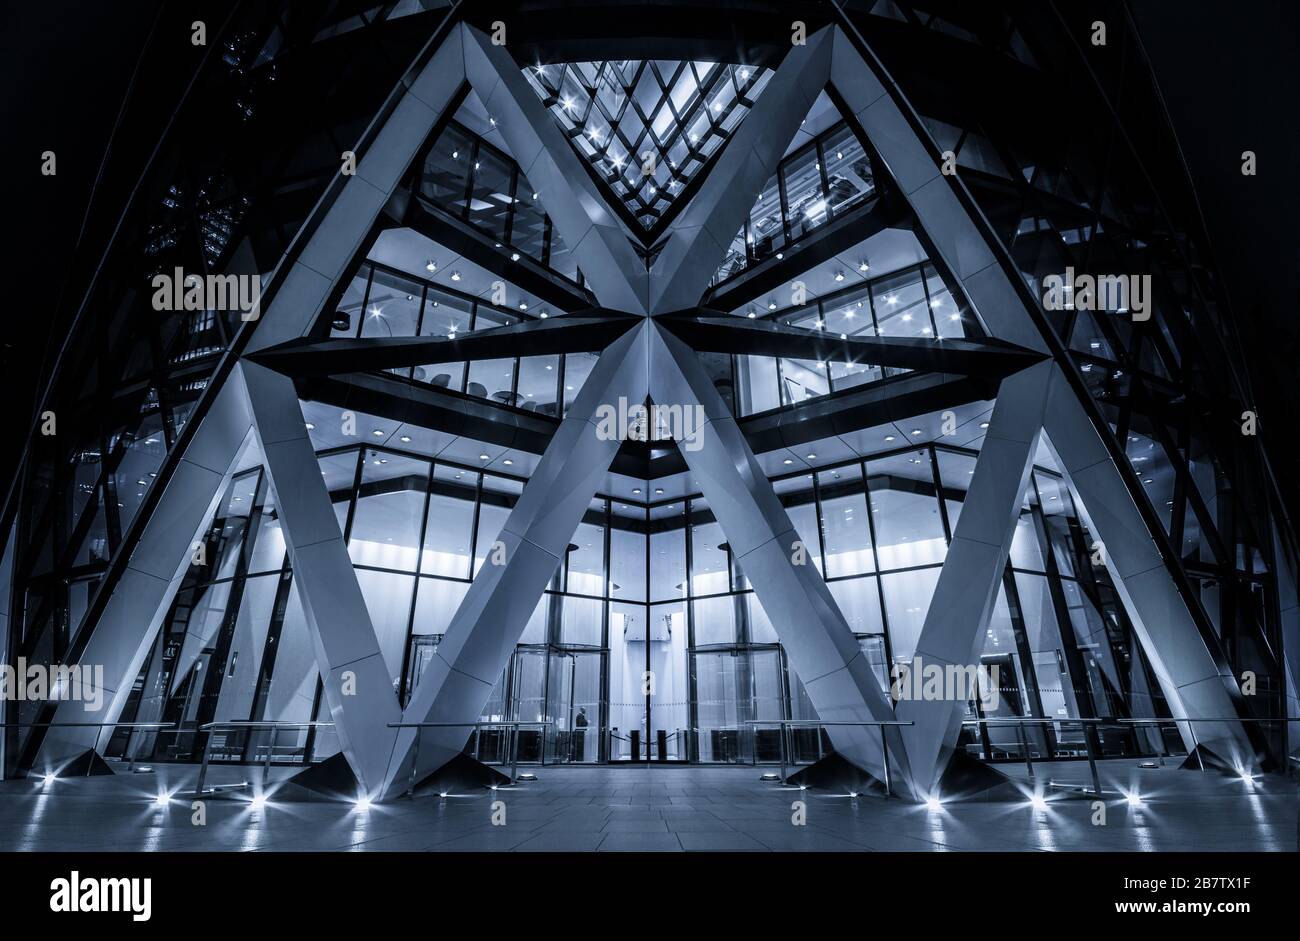 Night view of the entrance to the Gherkin building, 30 St Mary Axe, London, England. Stock Photo